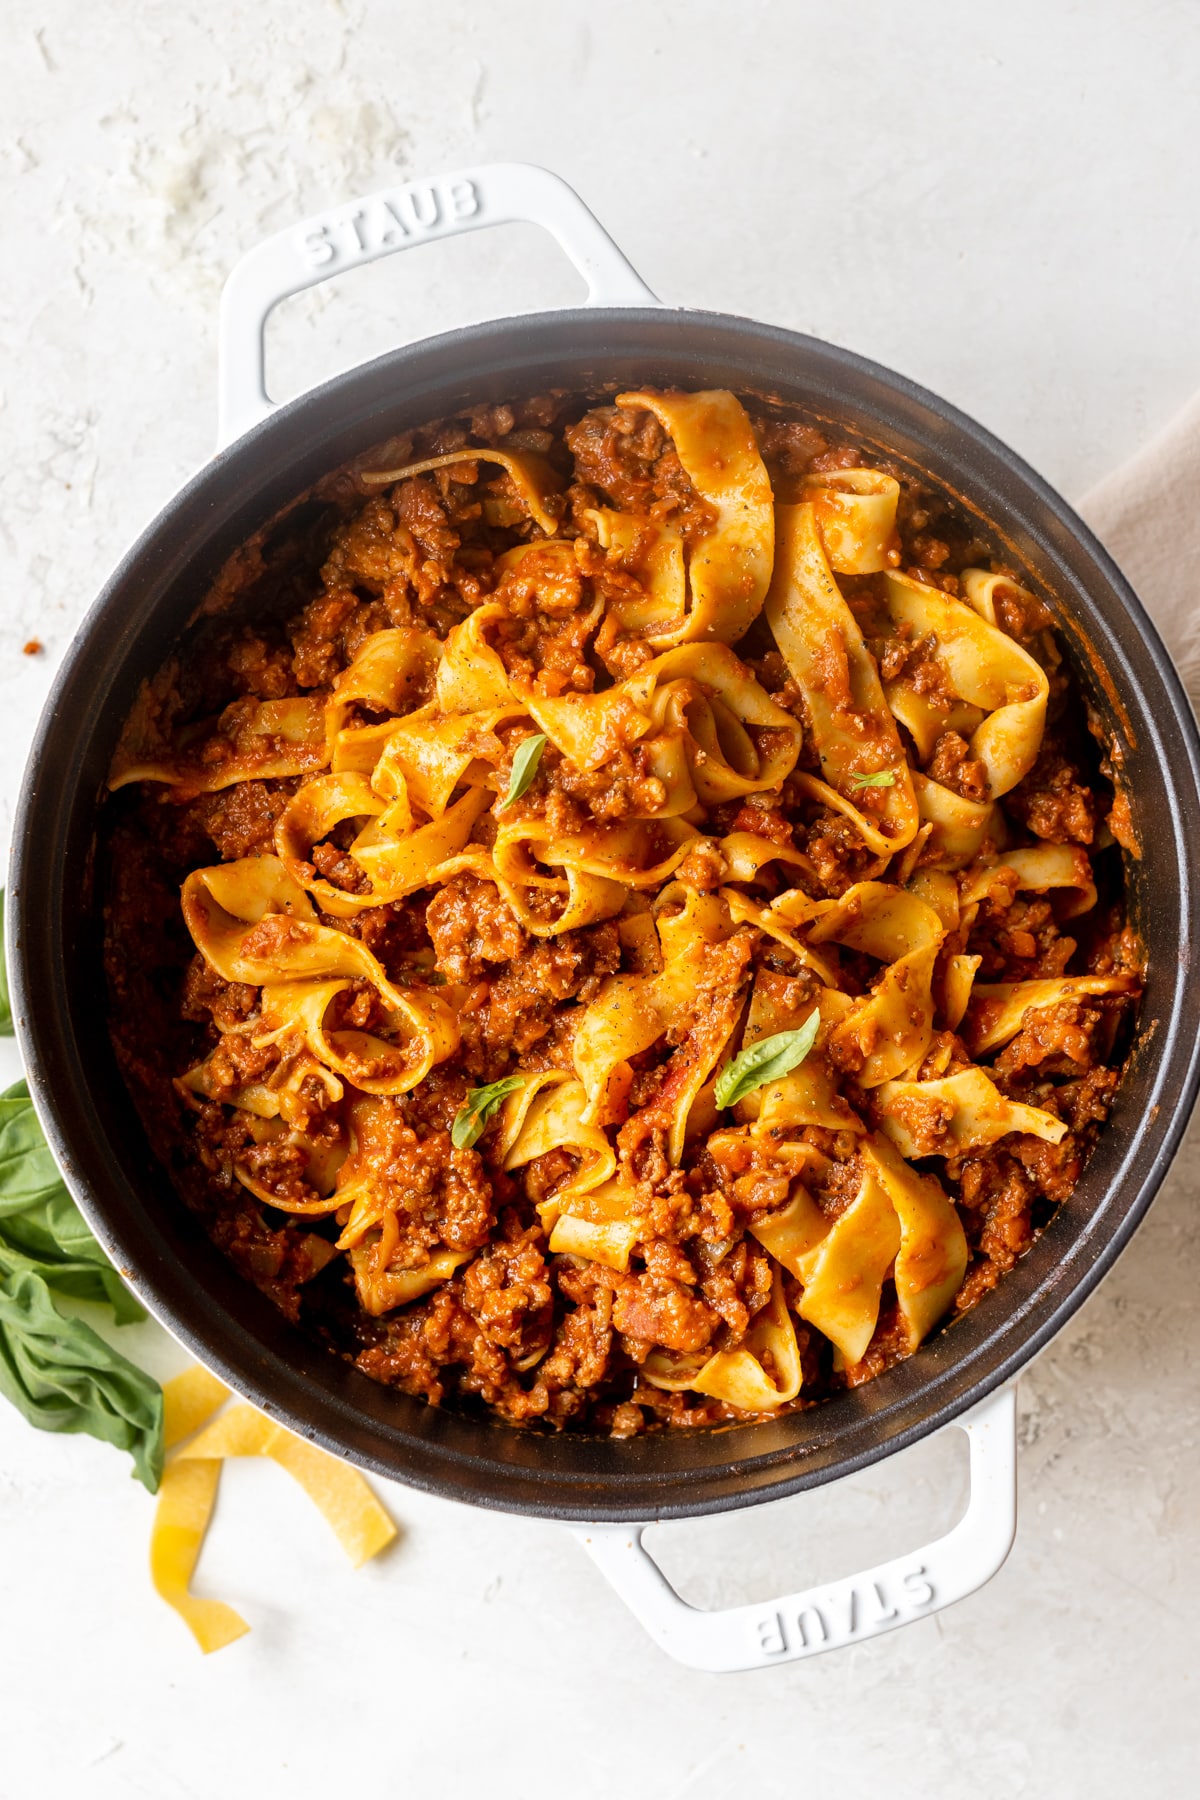 bolognese sauce swirled in cooked pappardelle pasta noodles with a white dutch oven. 